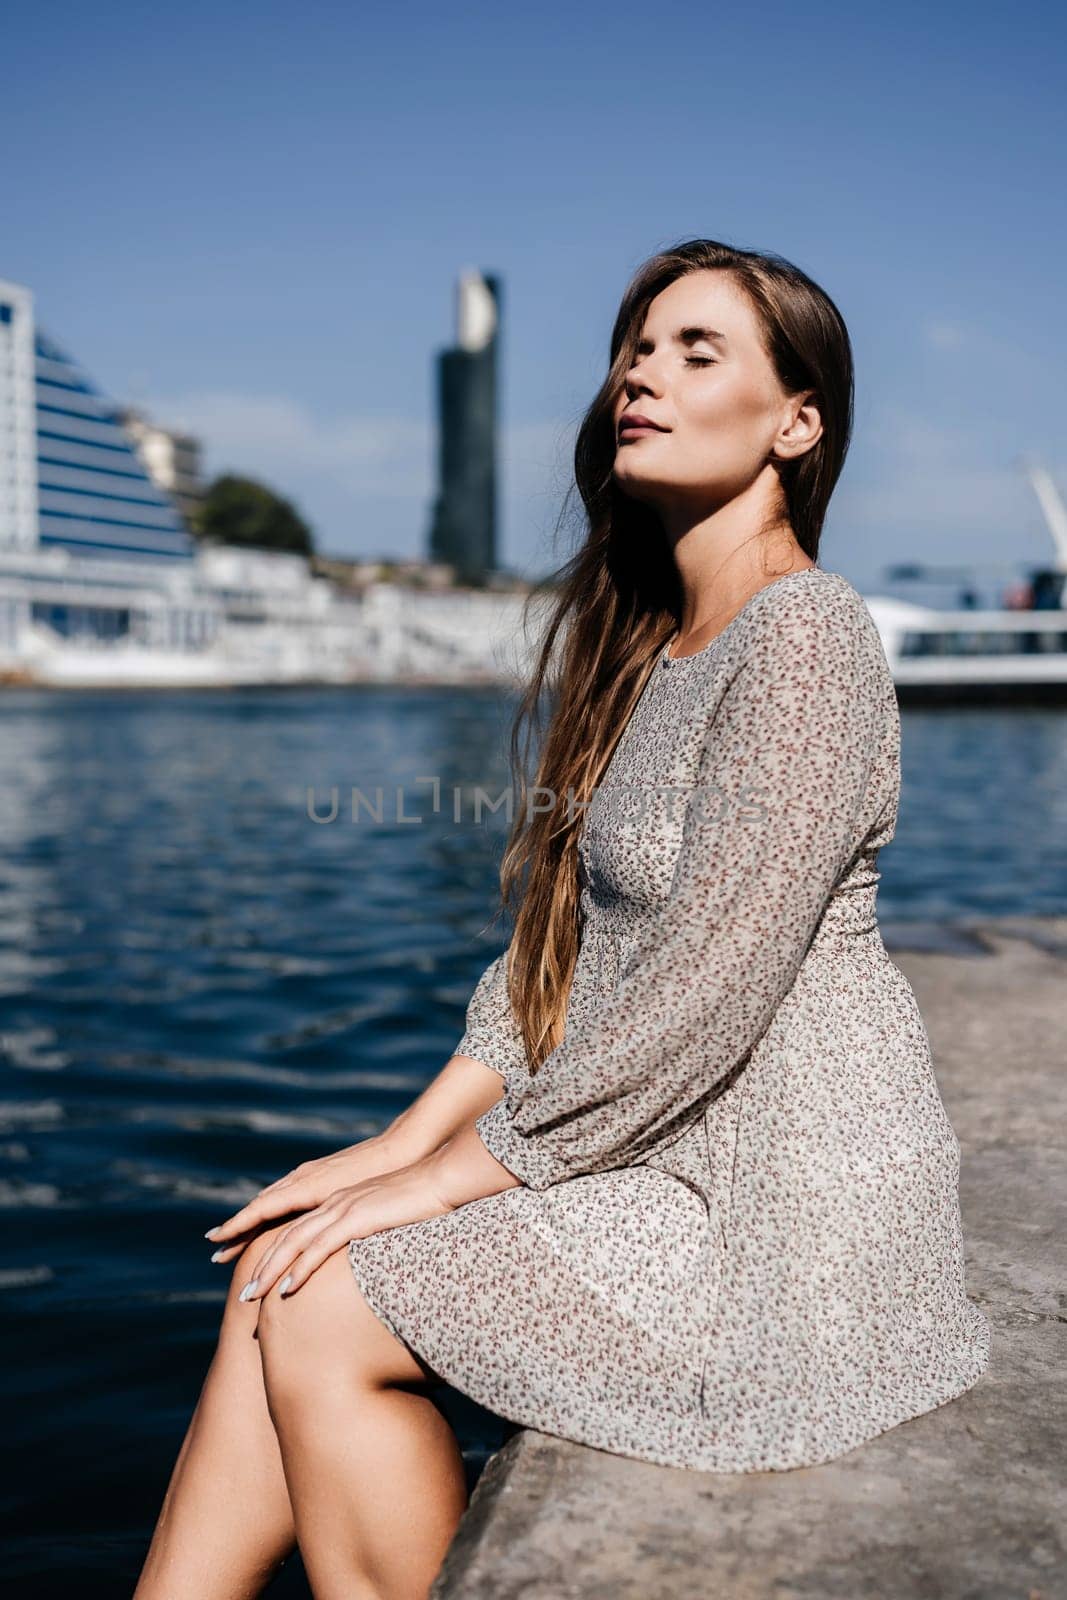 A woman with long hair is sitting on a dock by the water. She is wearing a white dress and she is looking at the water. The scene has a calm and peaceful mood